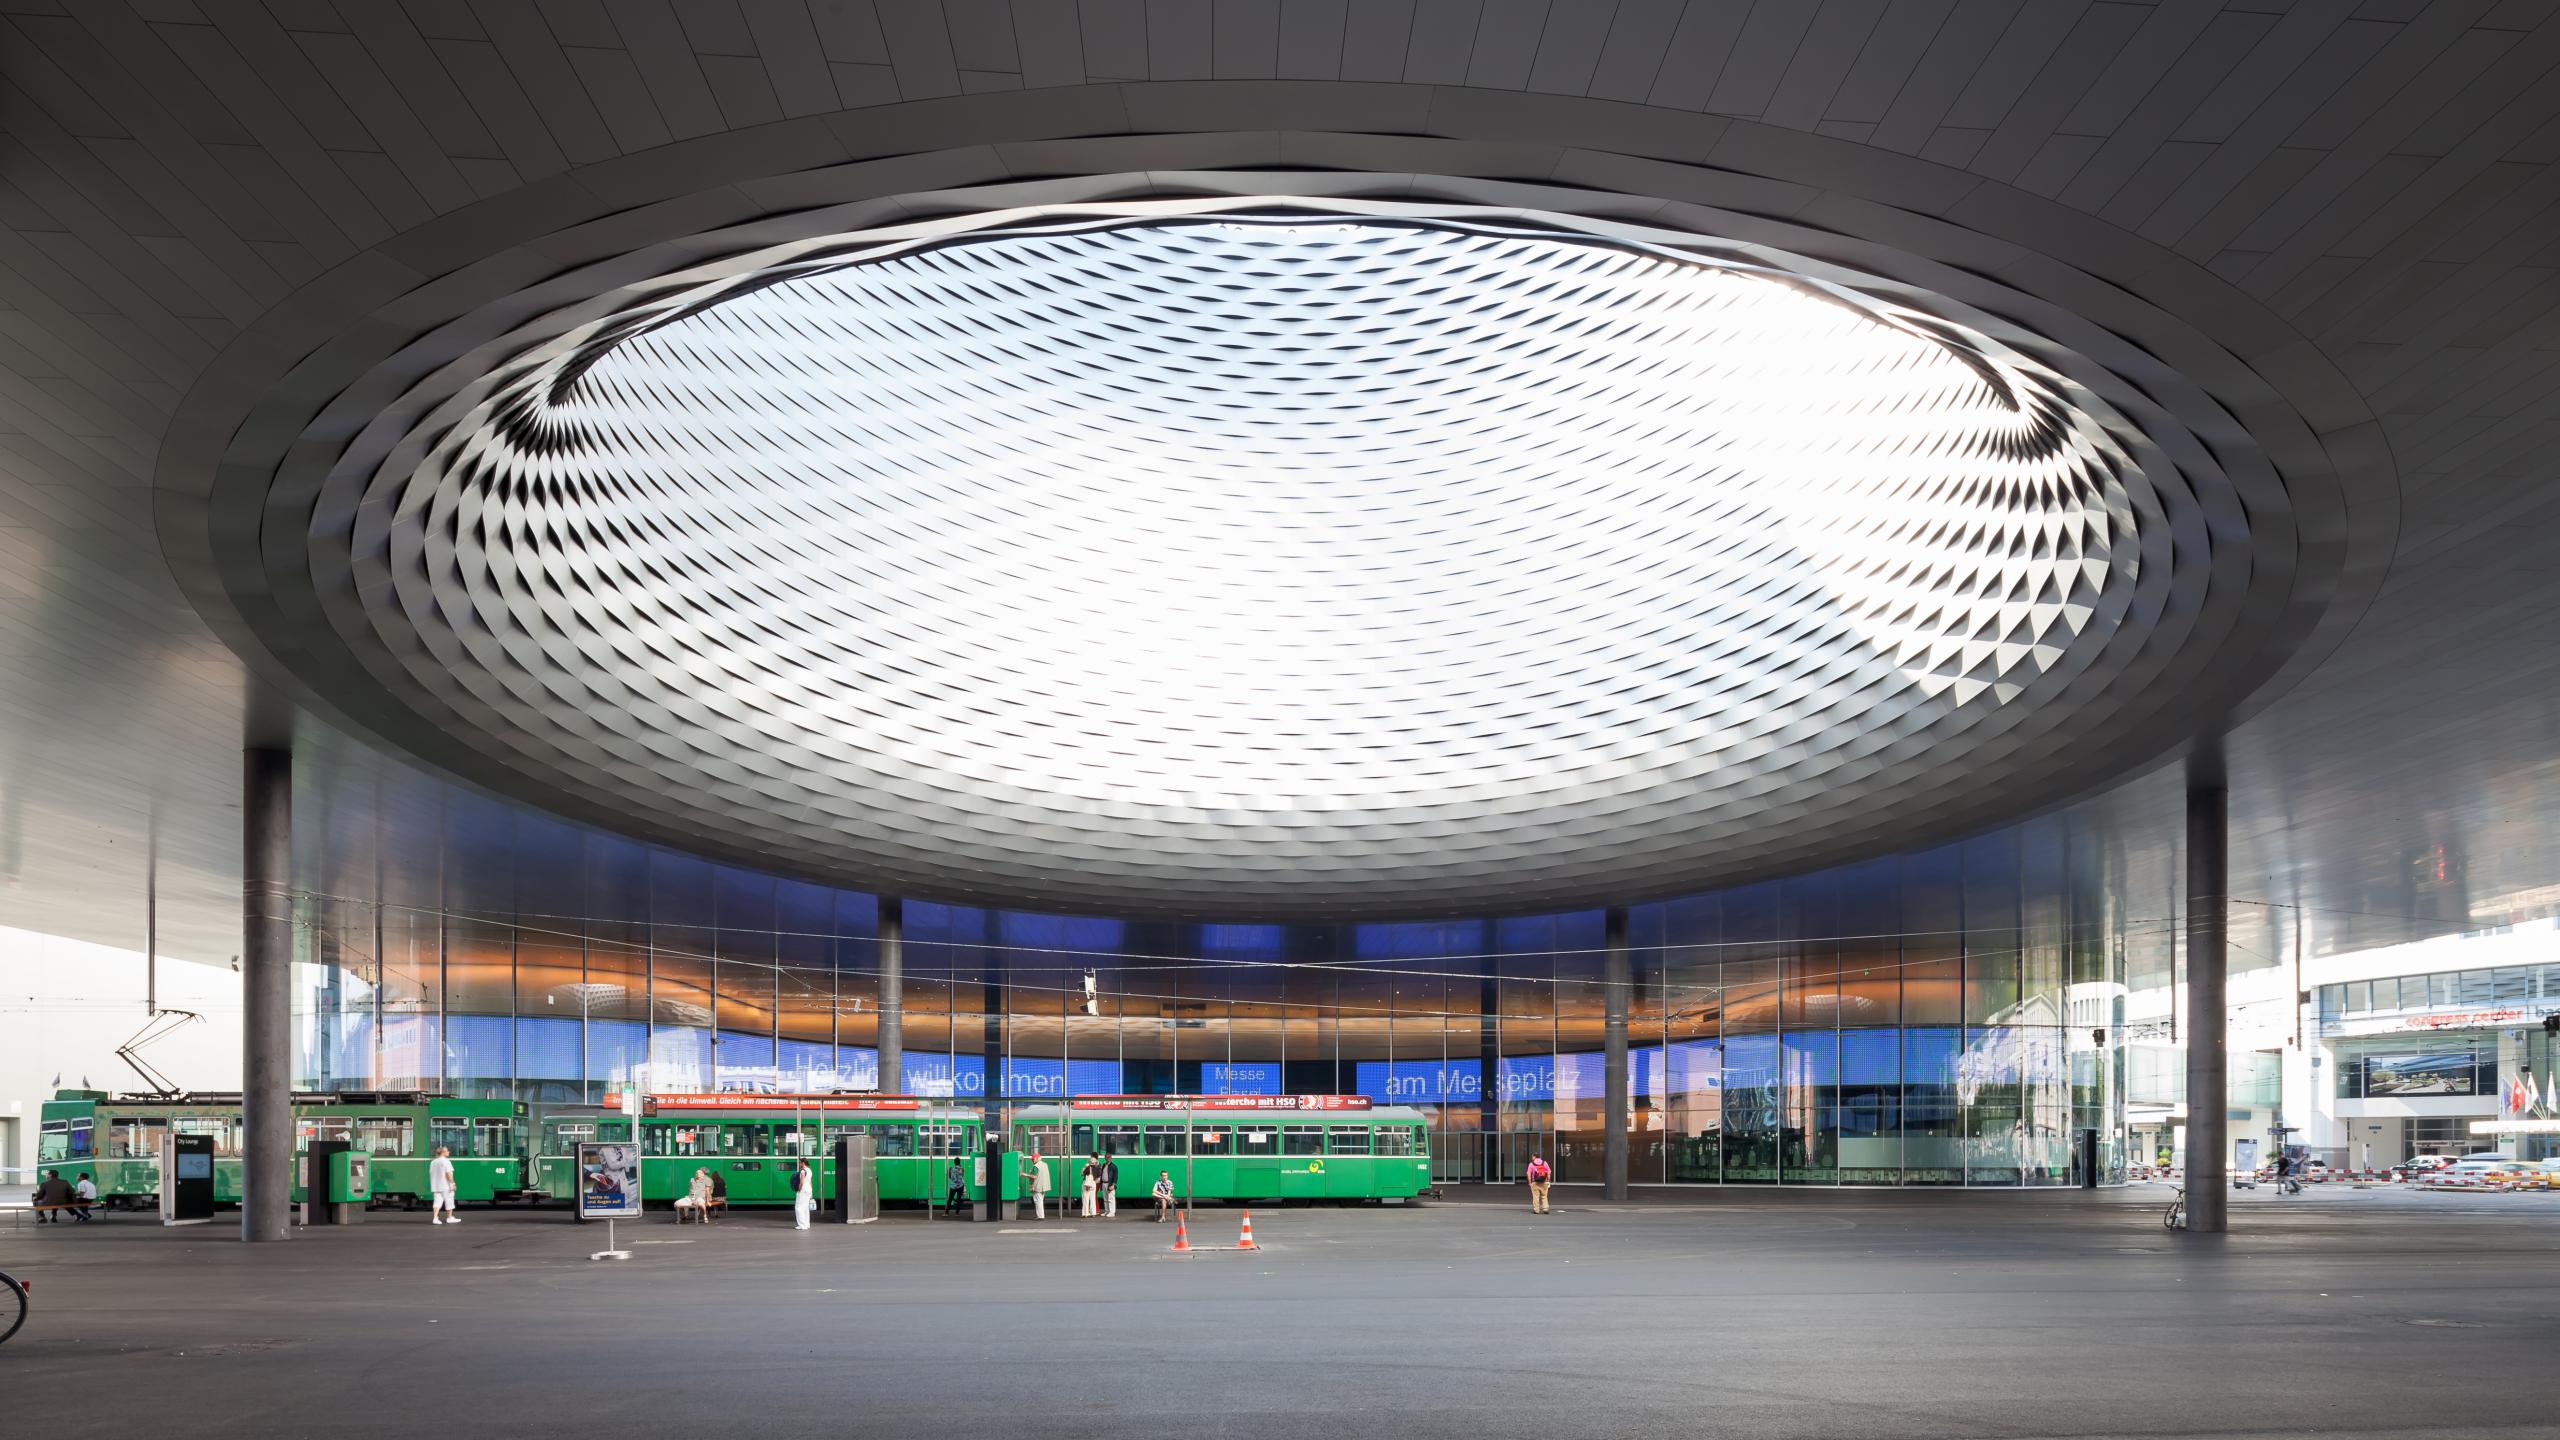 Photograph of Messe Basel New Hall, designed by Herzog & de Meuron and located in Basel, Switzerland